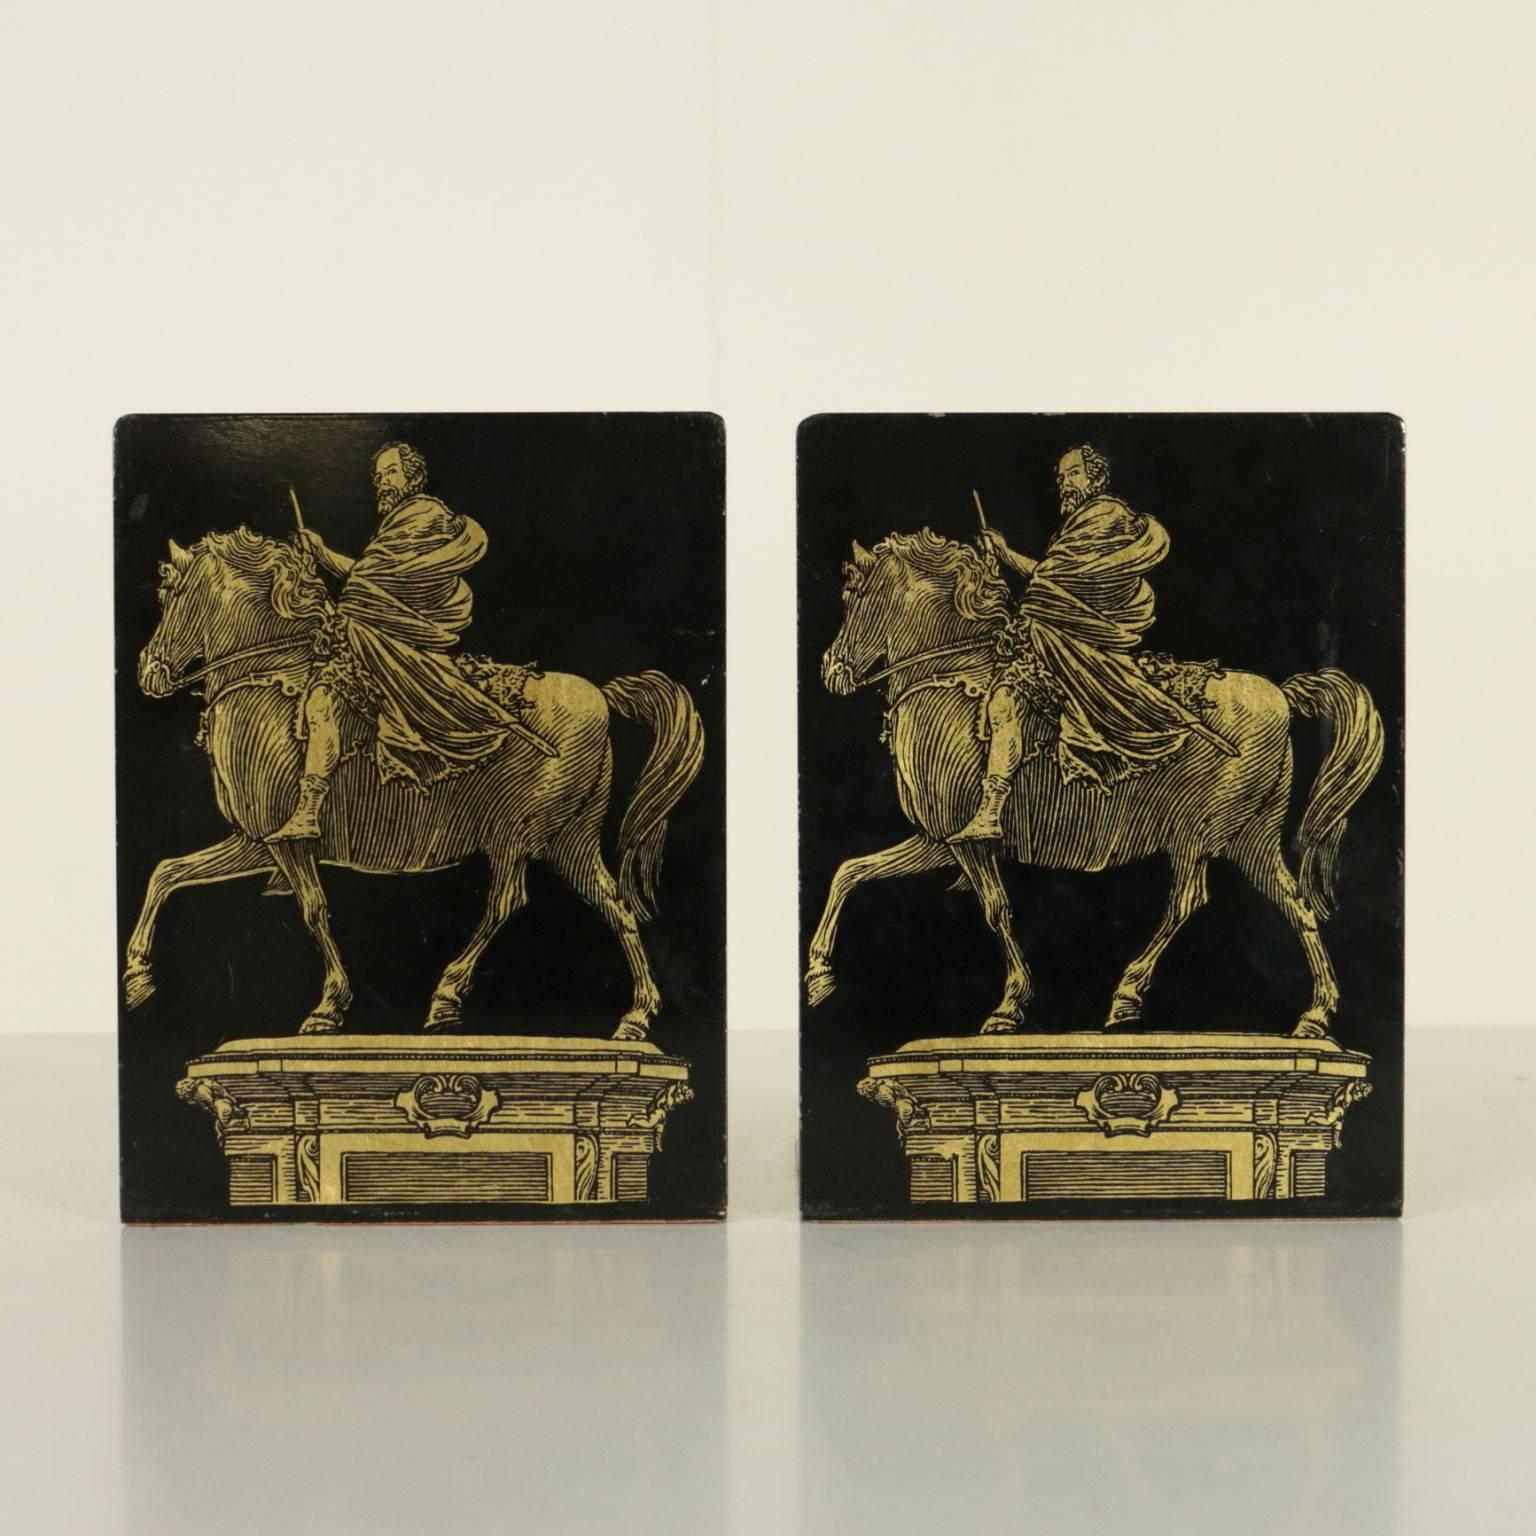 Pair of enamelled metal bookends designed by Piero Fornasetti with screen painted decorations. Manufacturing brand under the base. Manufactured in Milano, Italy, 1960s.